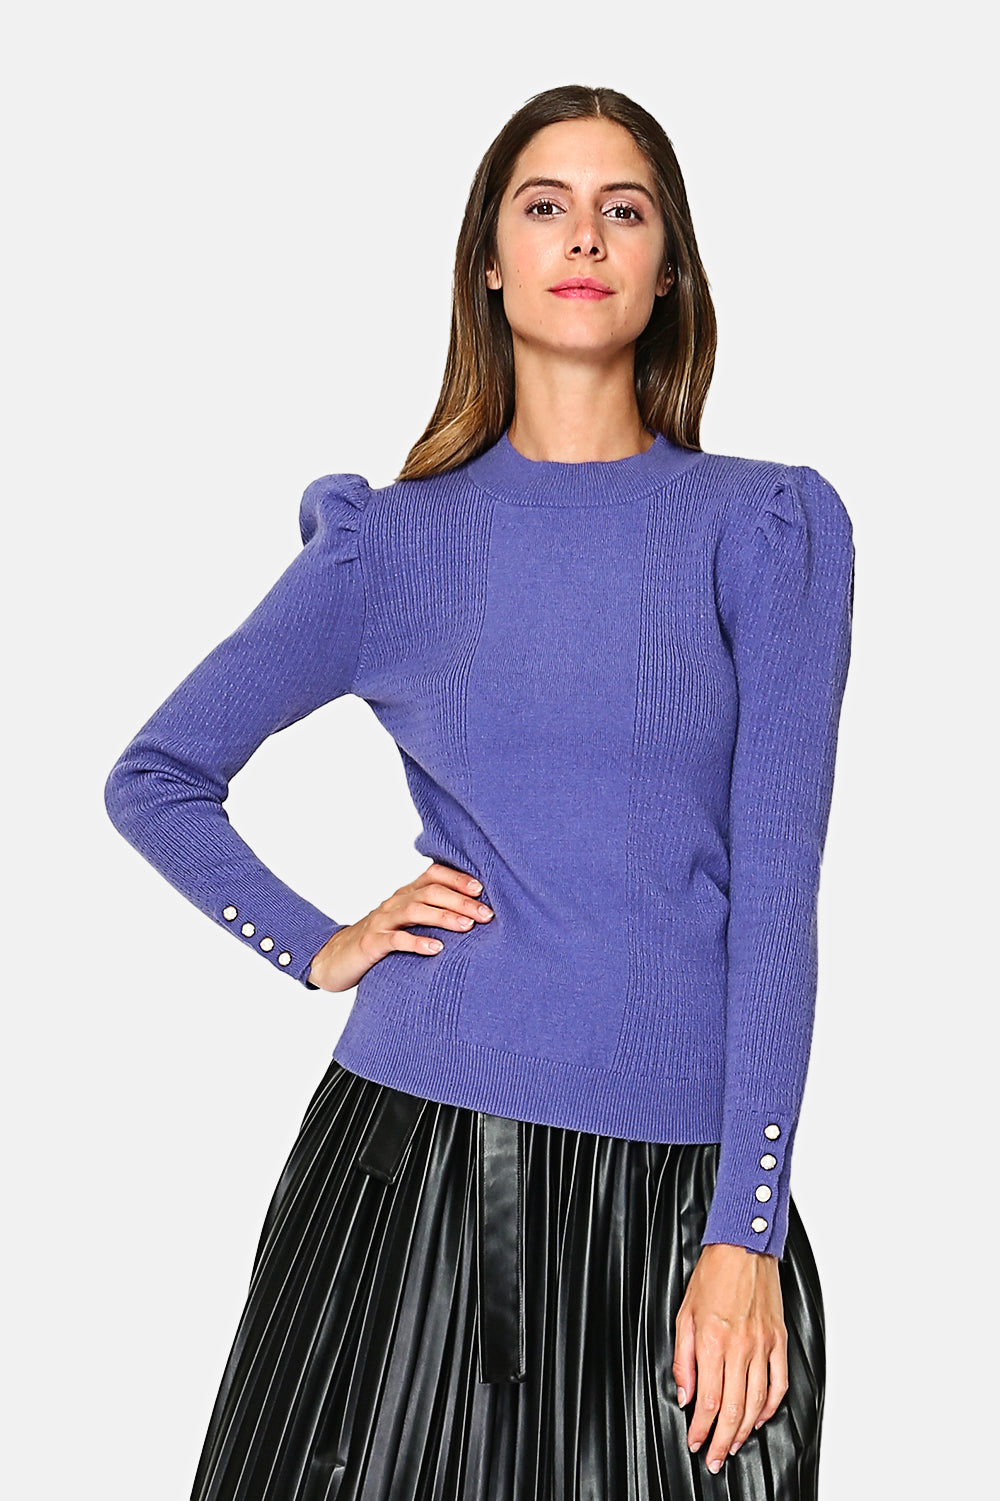 Slightly high neck sweater, fancy knit, buttoning at the bottom of the sleeve